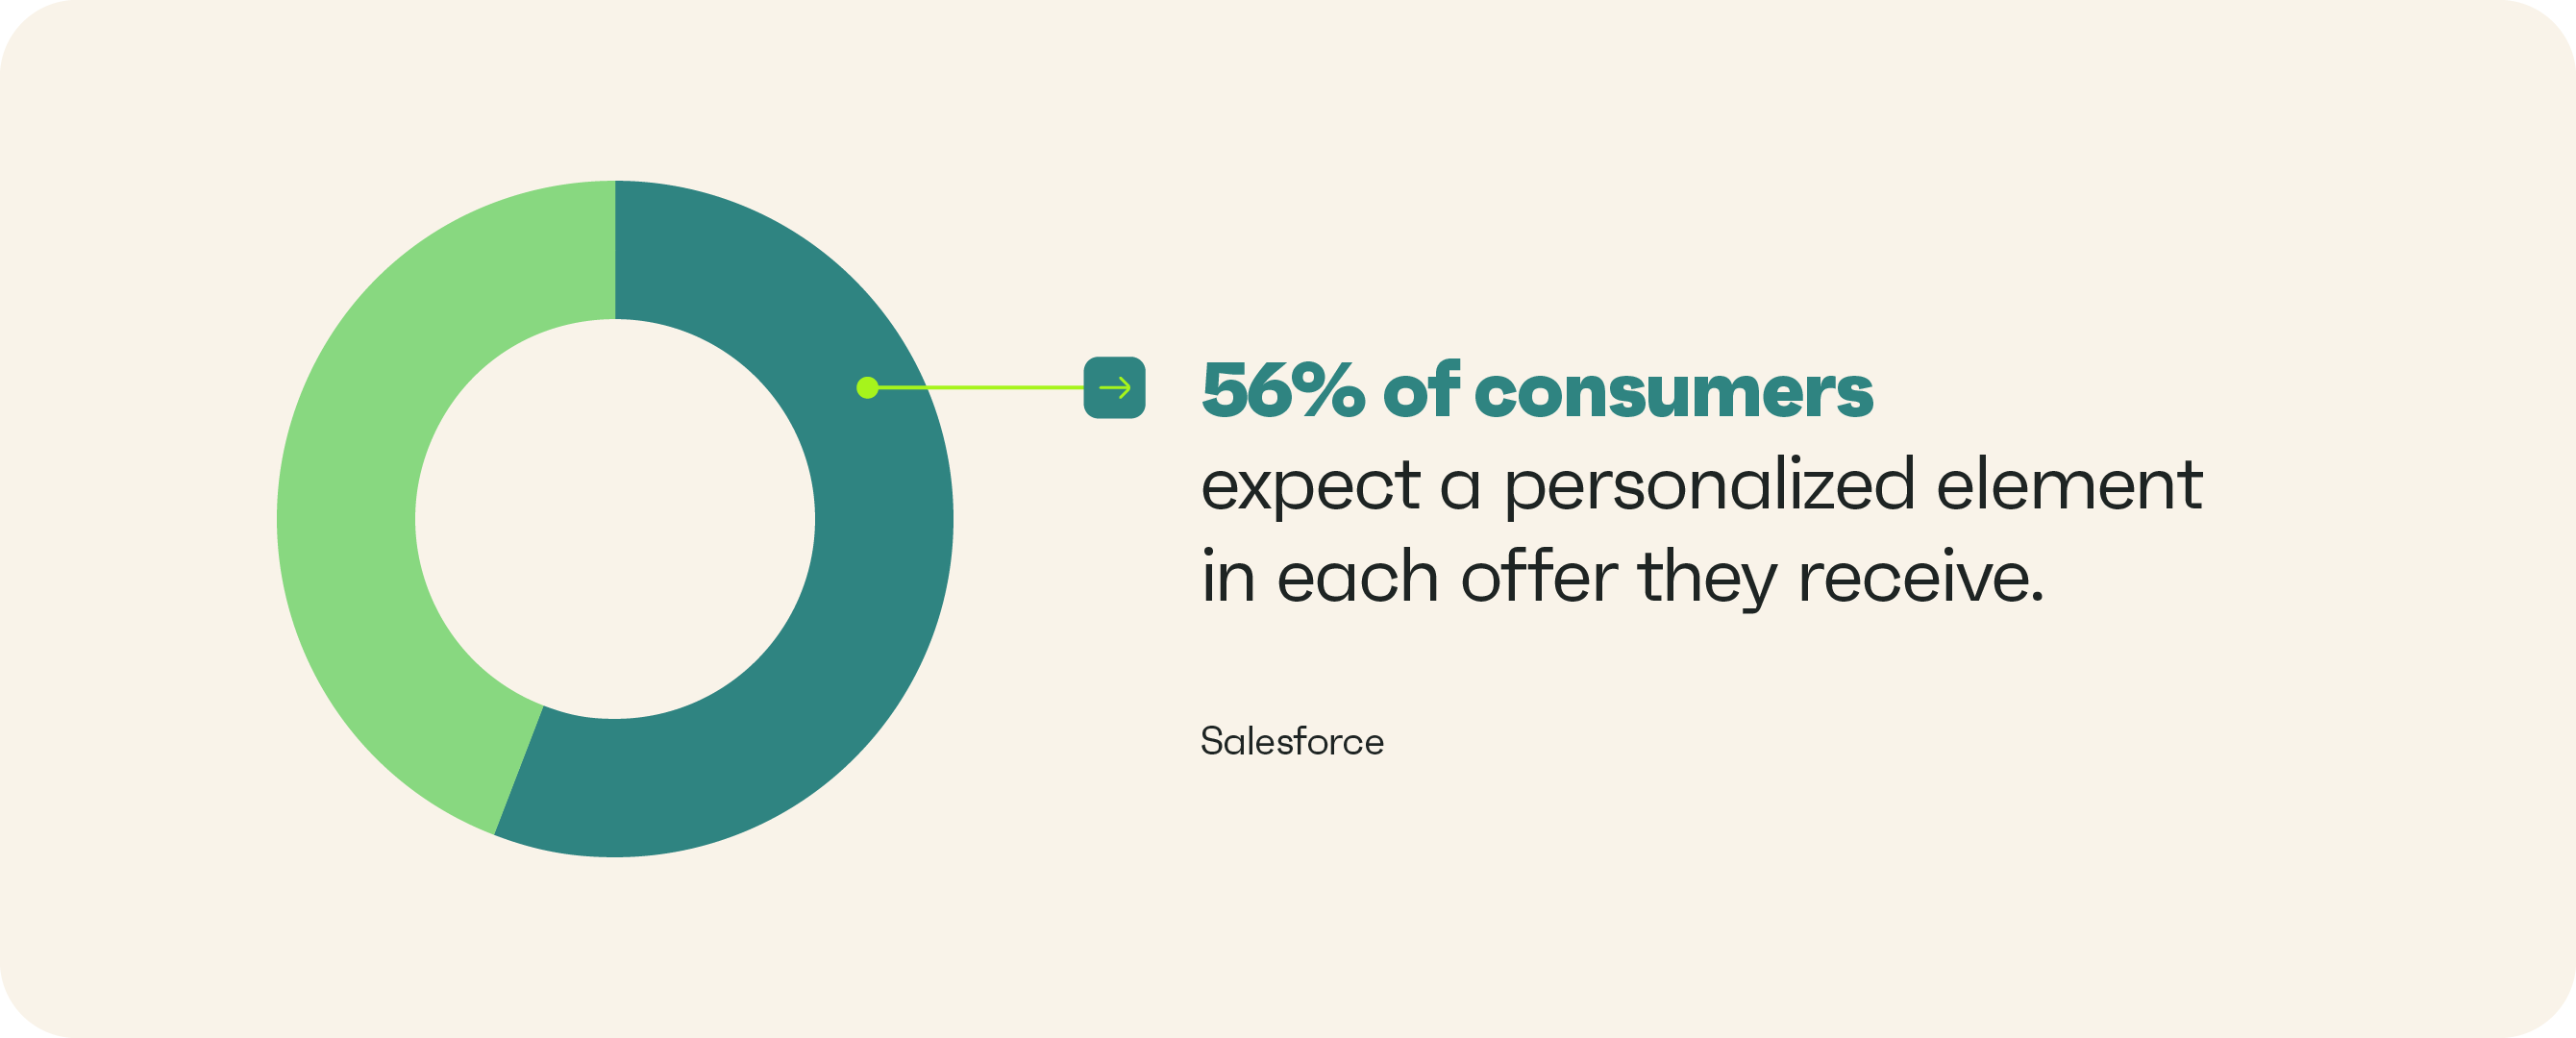 56% of consumers anticipate a personalized touch in every offer they receive